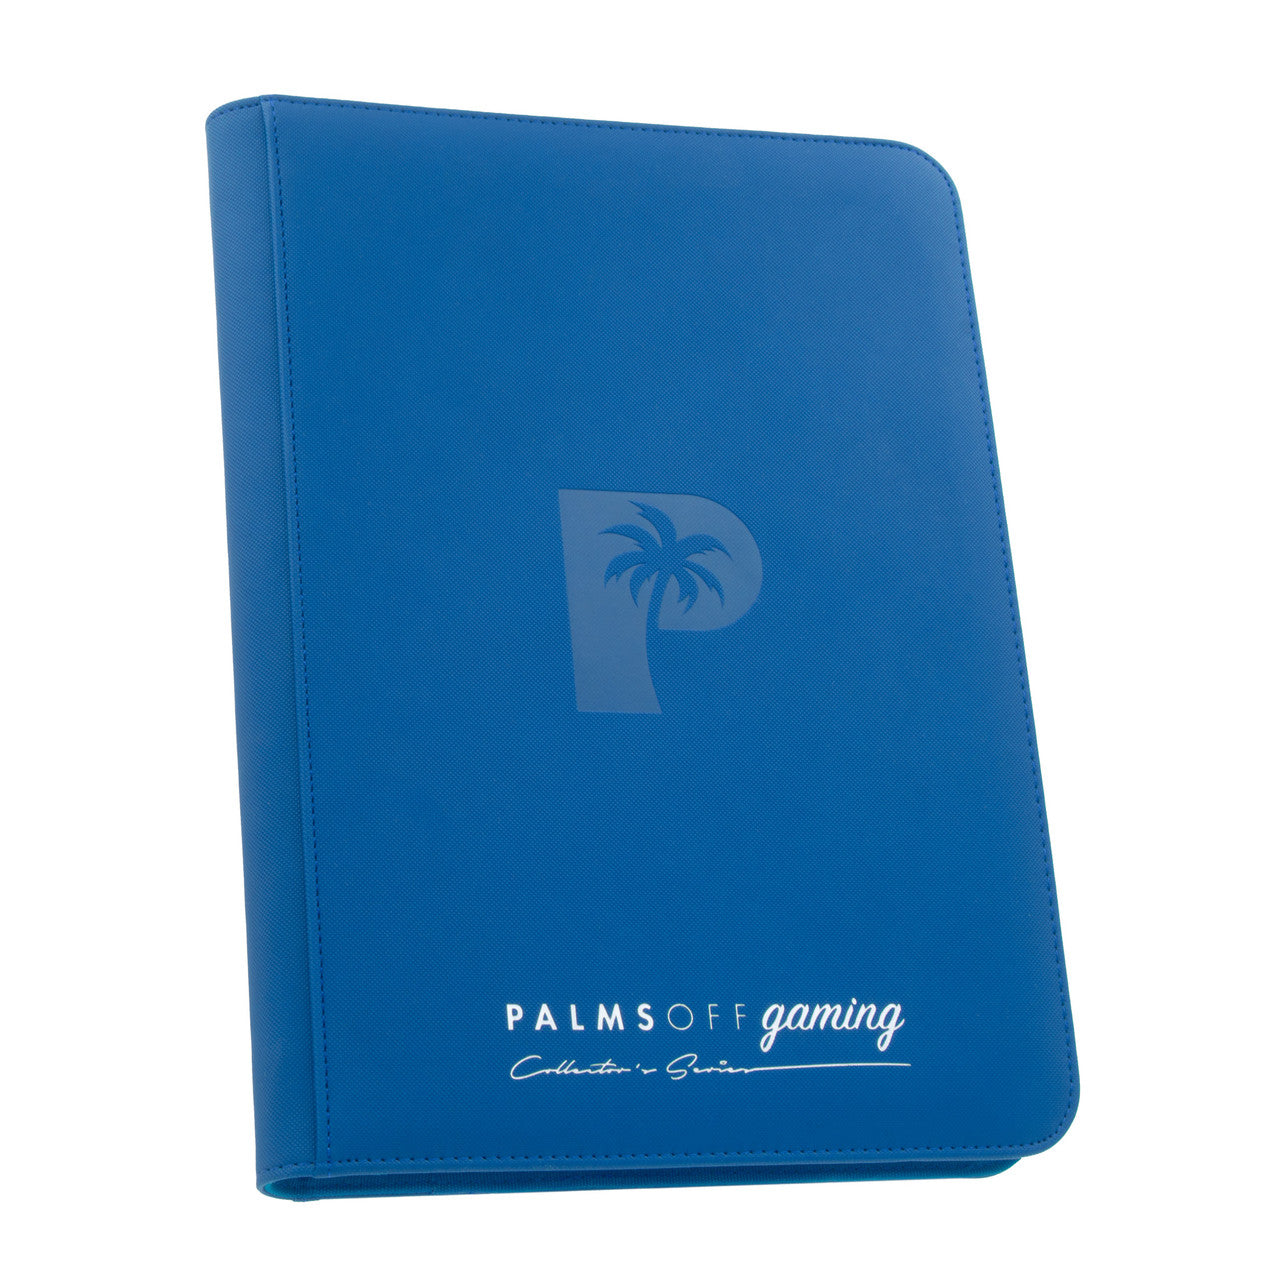 Palms Off Gaming - Collector's Series 9 Pocket Zip Trading Card Binder - BLUE